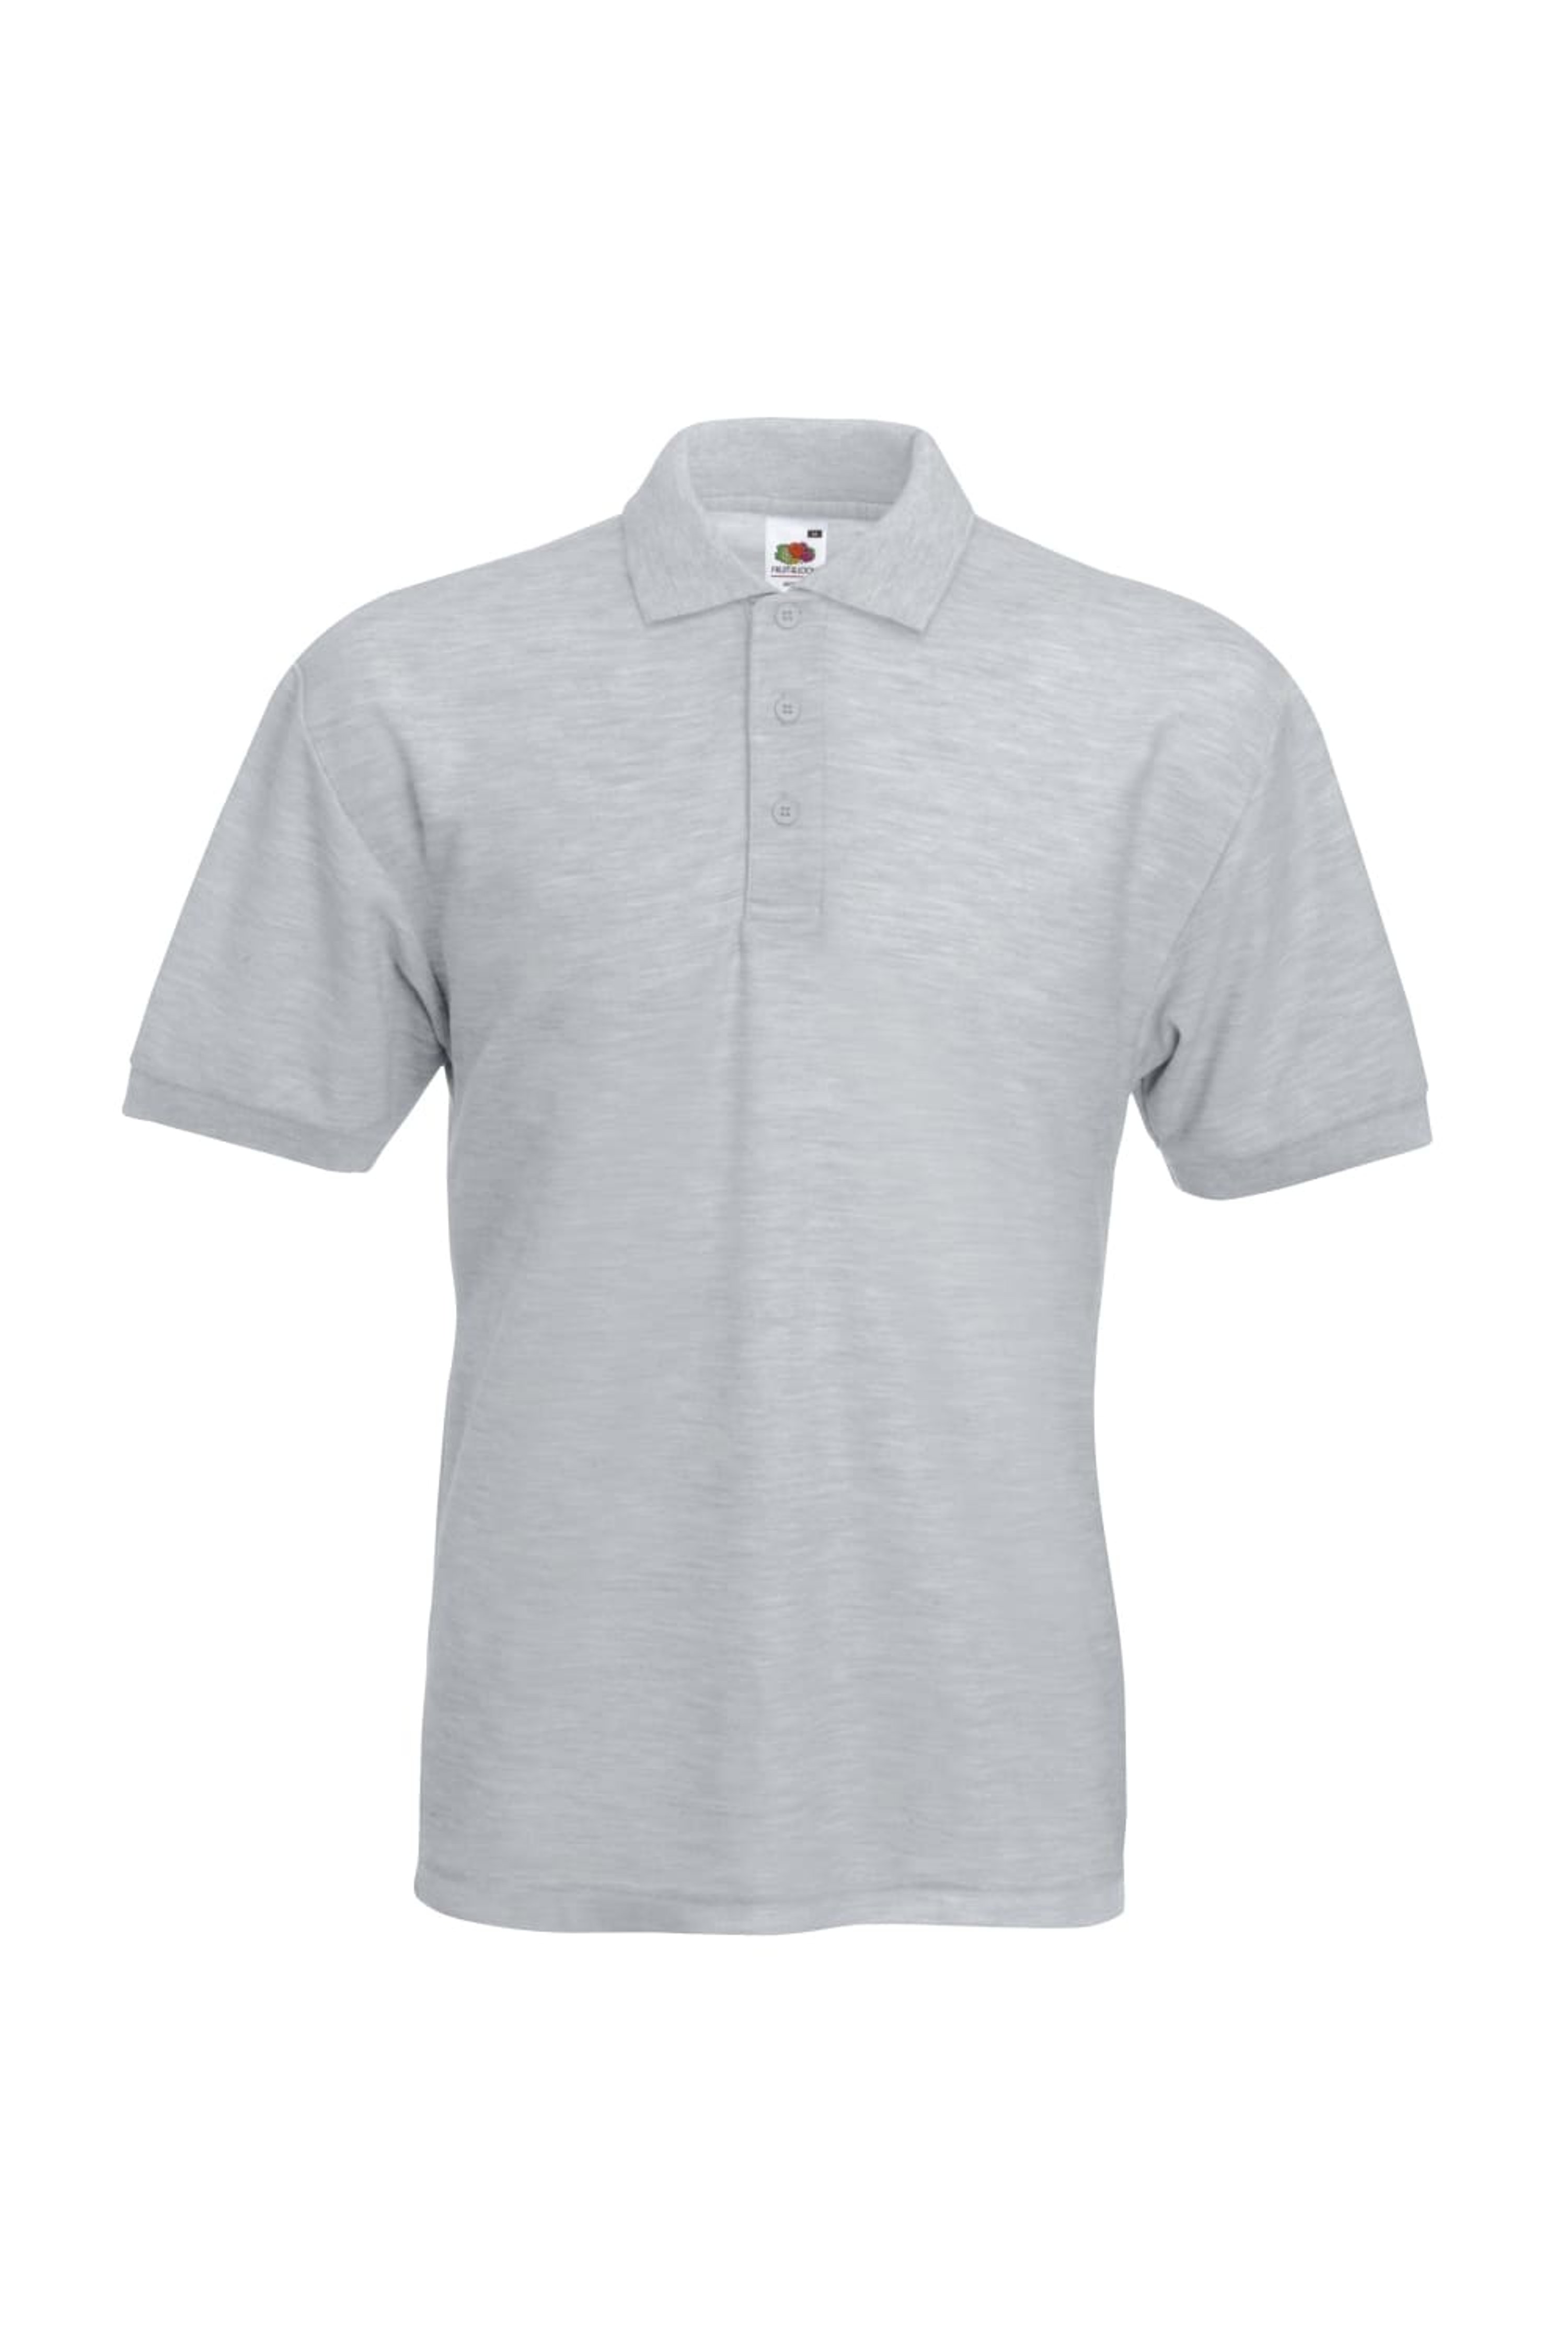 FRUIT OF THE LOOM FRUIT OF THE LOOM MENS 65/35 PIQUE SHORT SLEEVE POLO SHIRT (HEATHER GRAY)